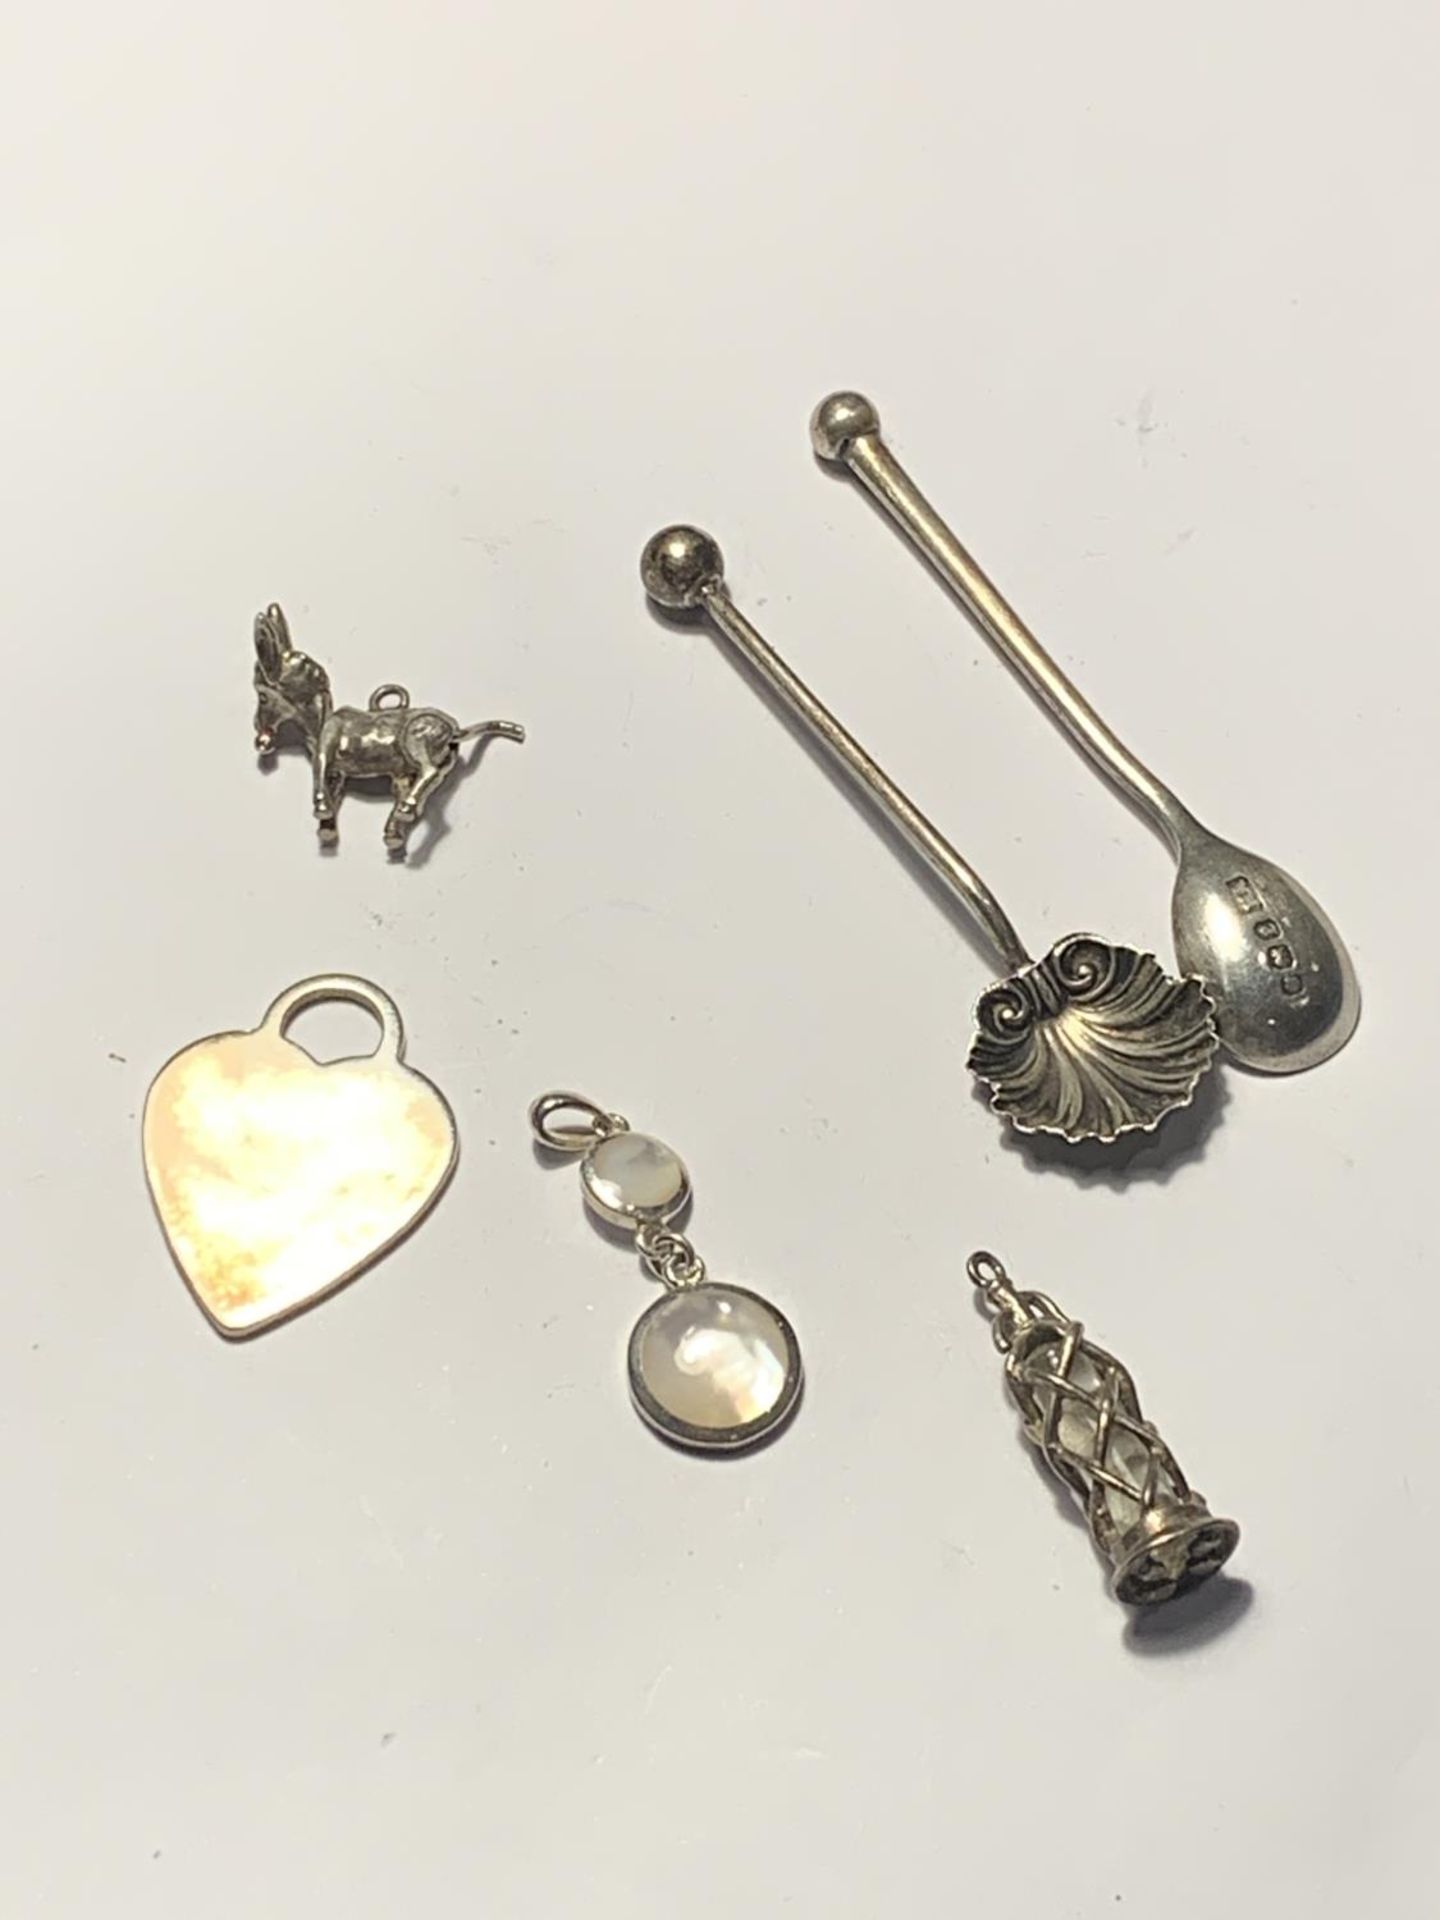 VARIOUS ITEMS TO INCLUDE A DONKEY CHARM, SILVER SPOONS ETC